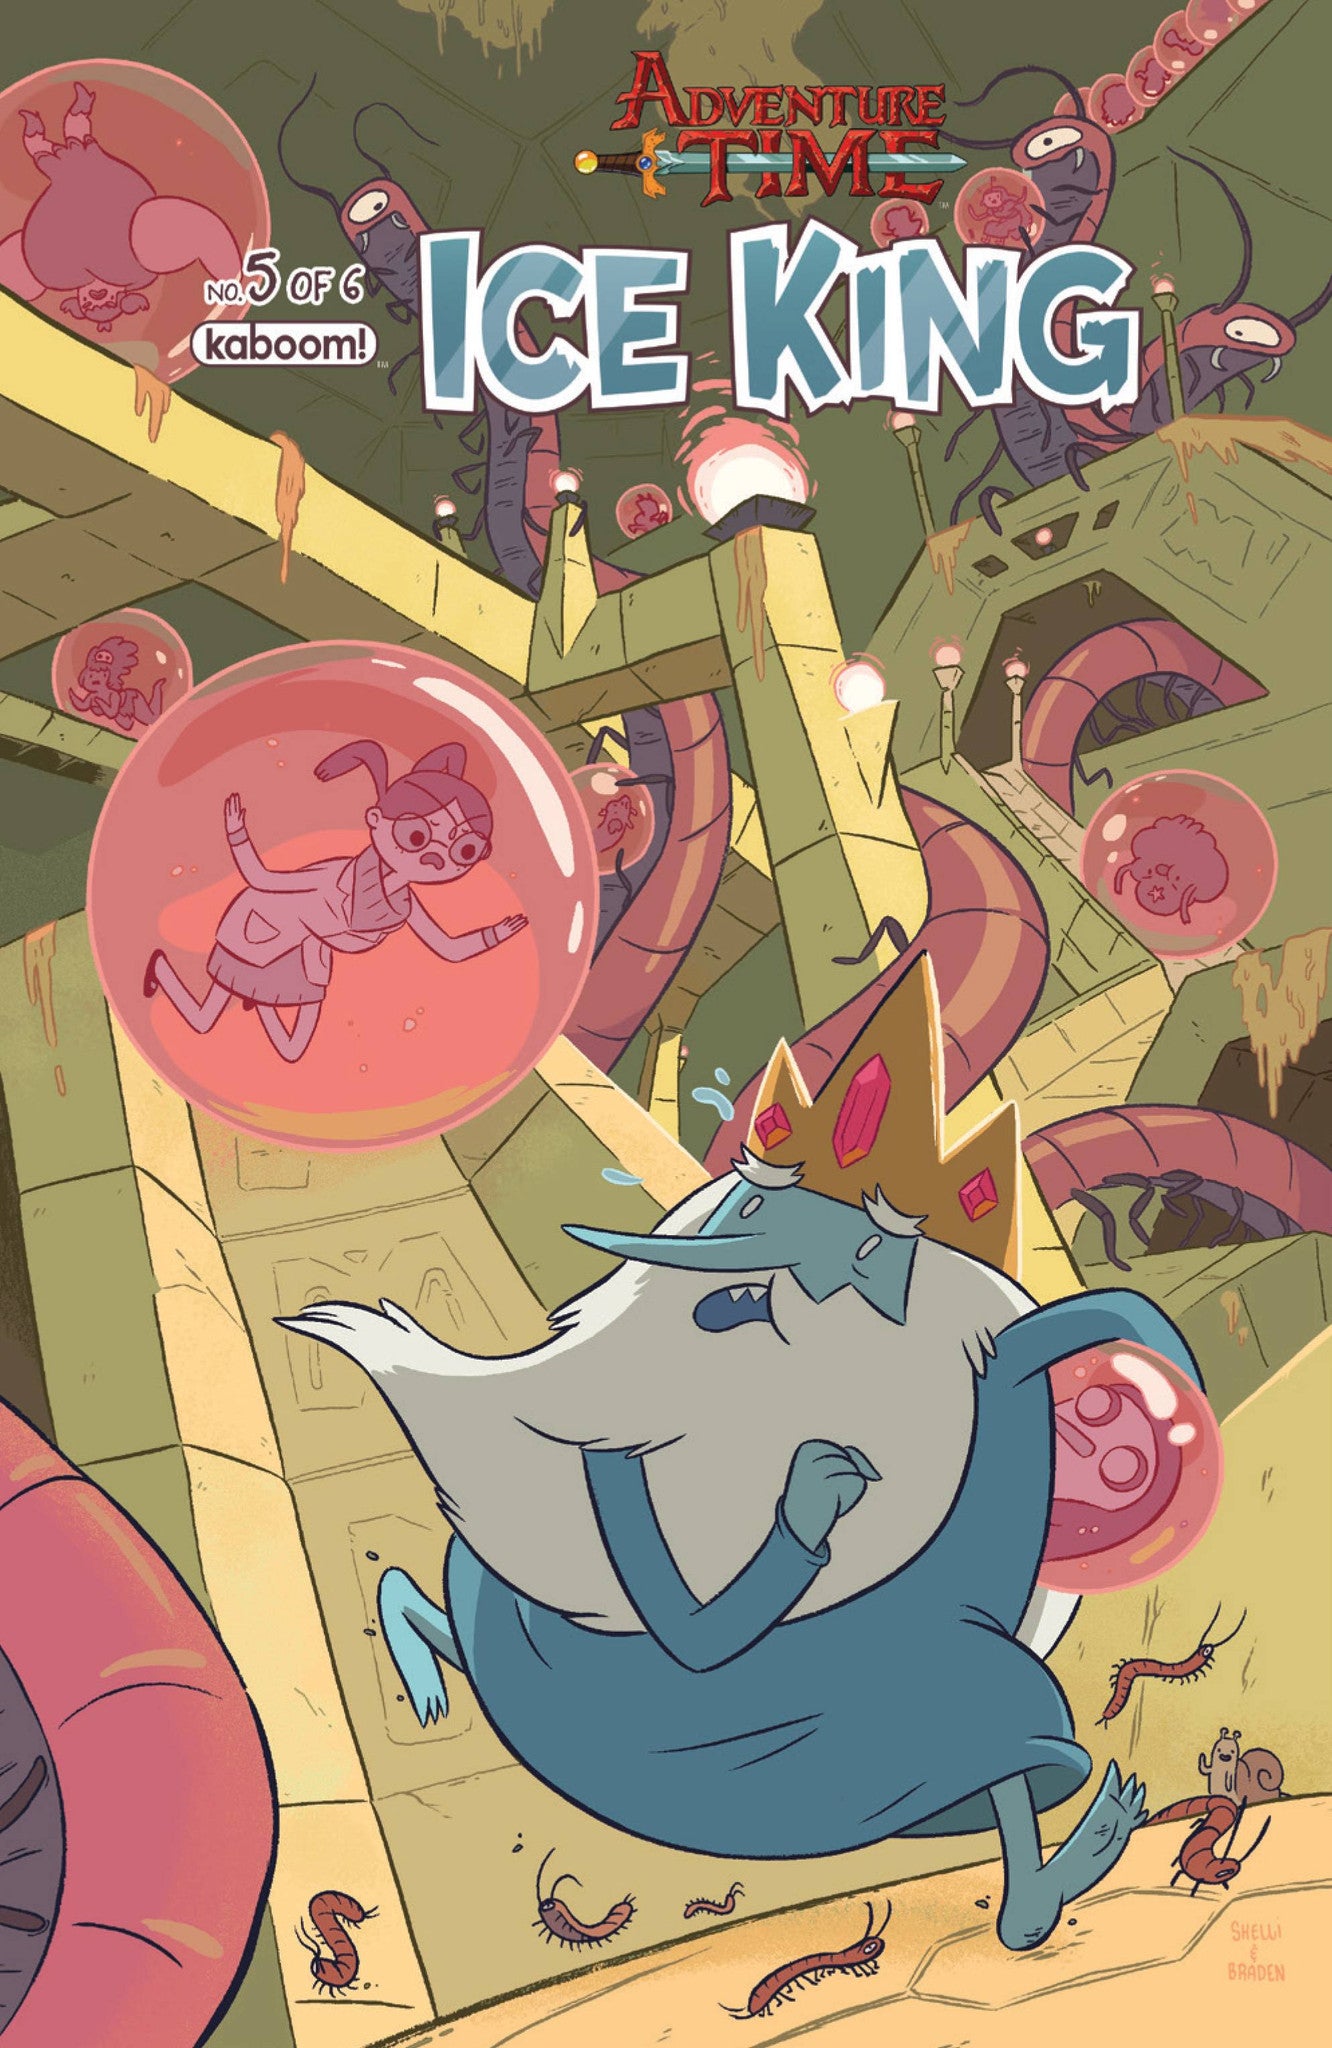 ADVENTURE TIME ICE KING #5 COVER